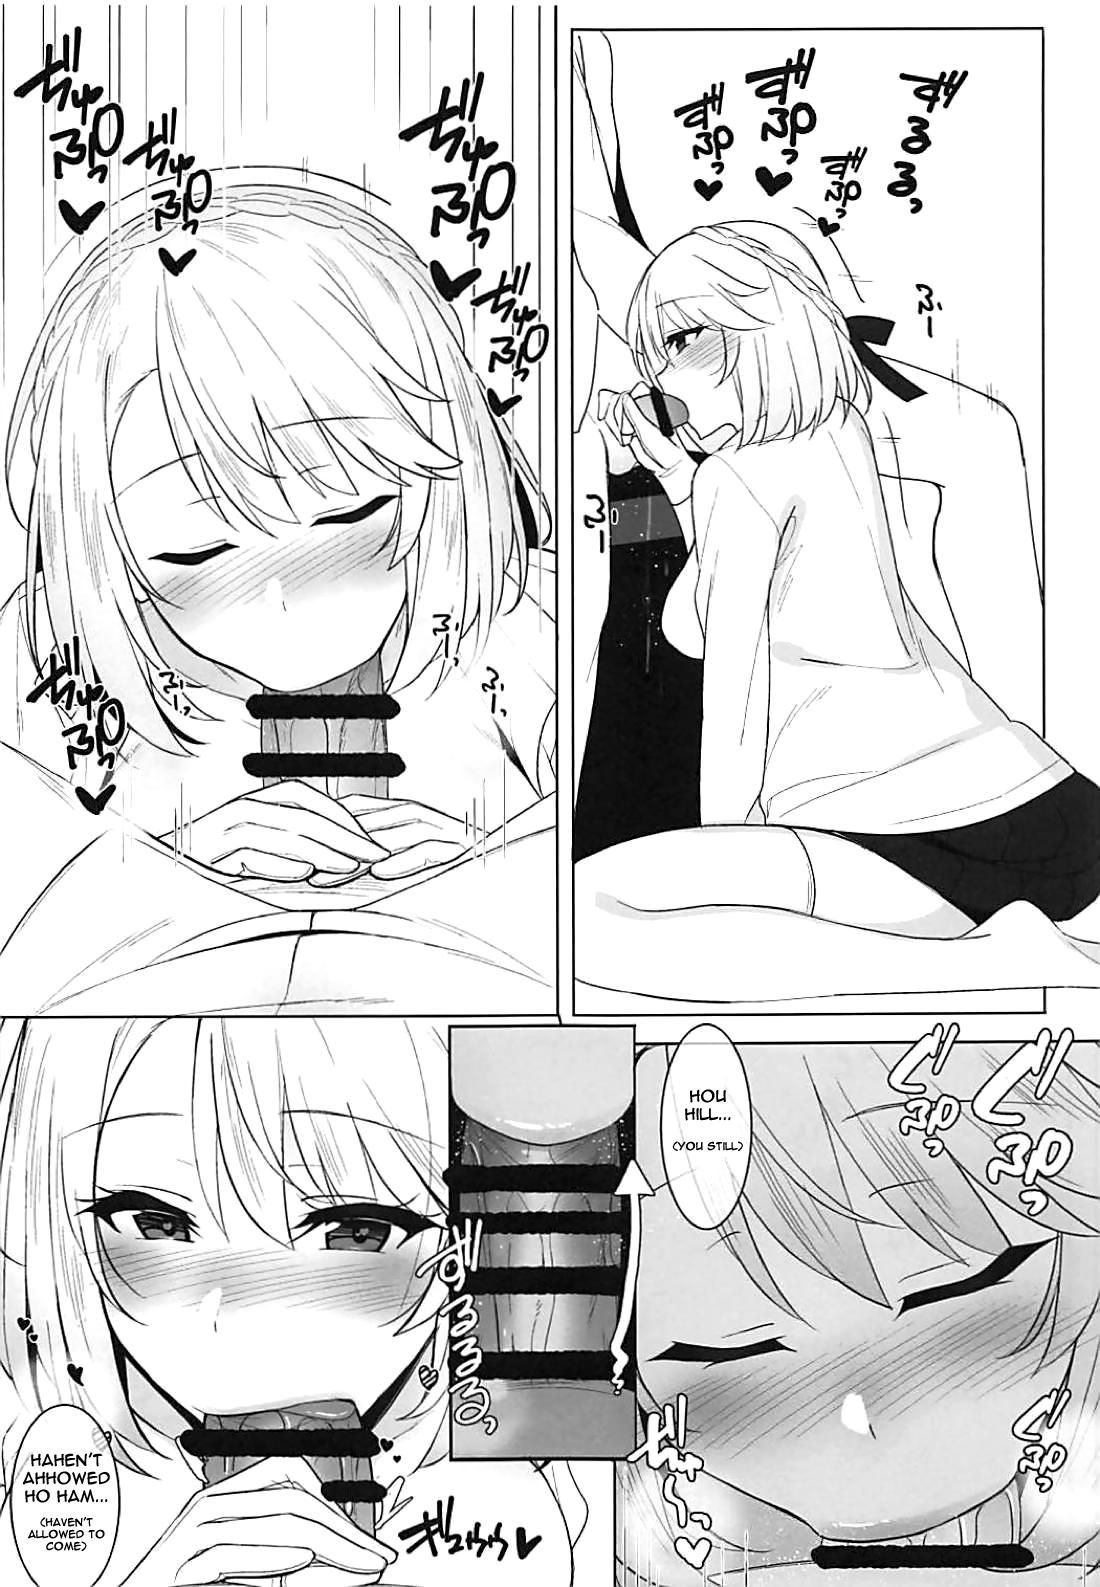 Big Pussy Wales to! | With Wales! - Azur lane Straight - Page 9